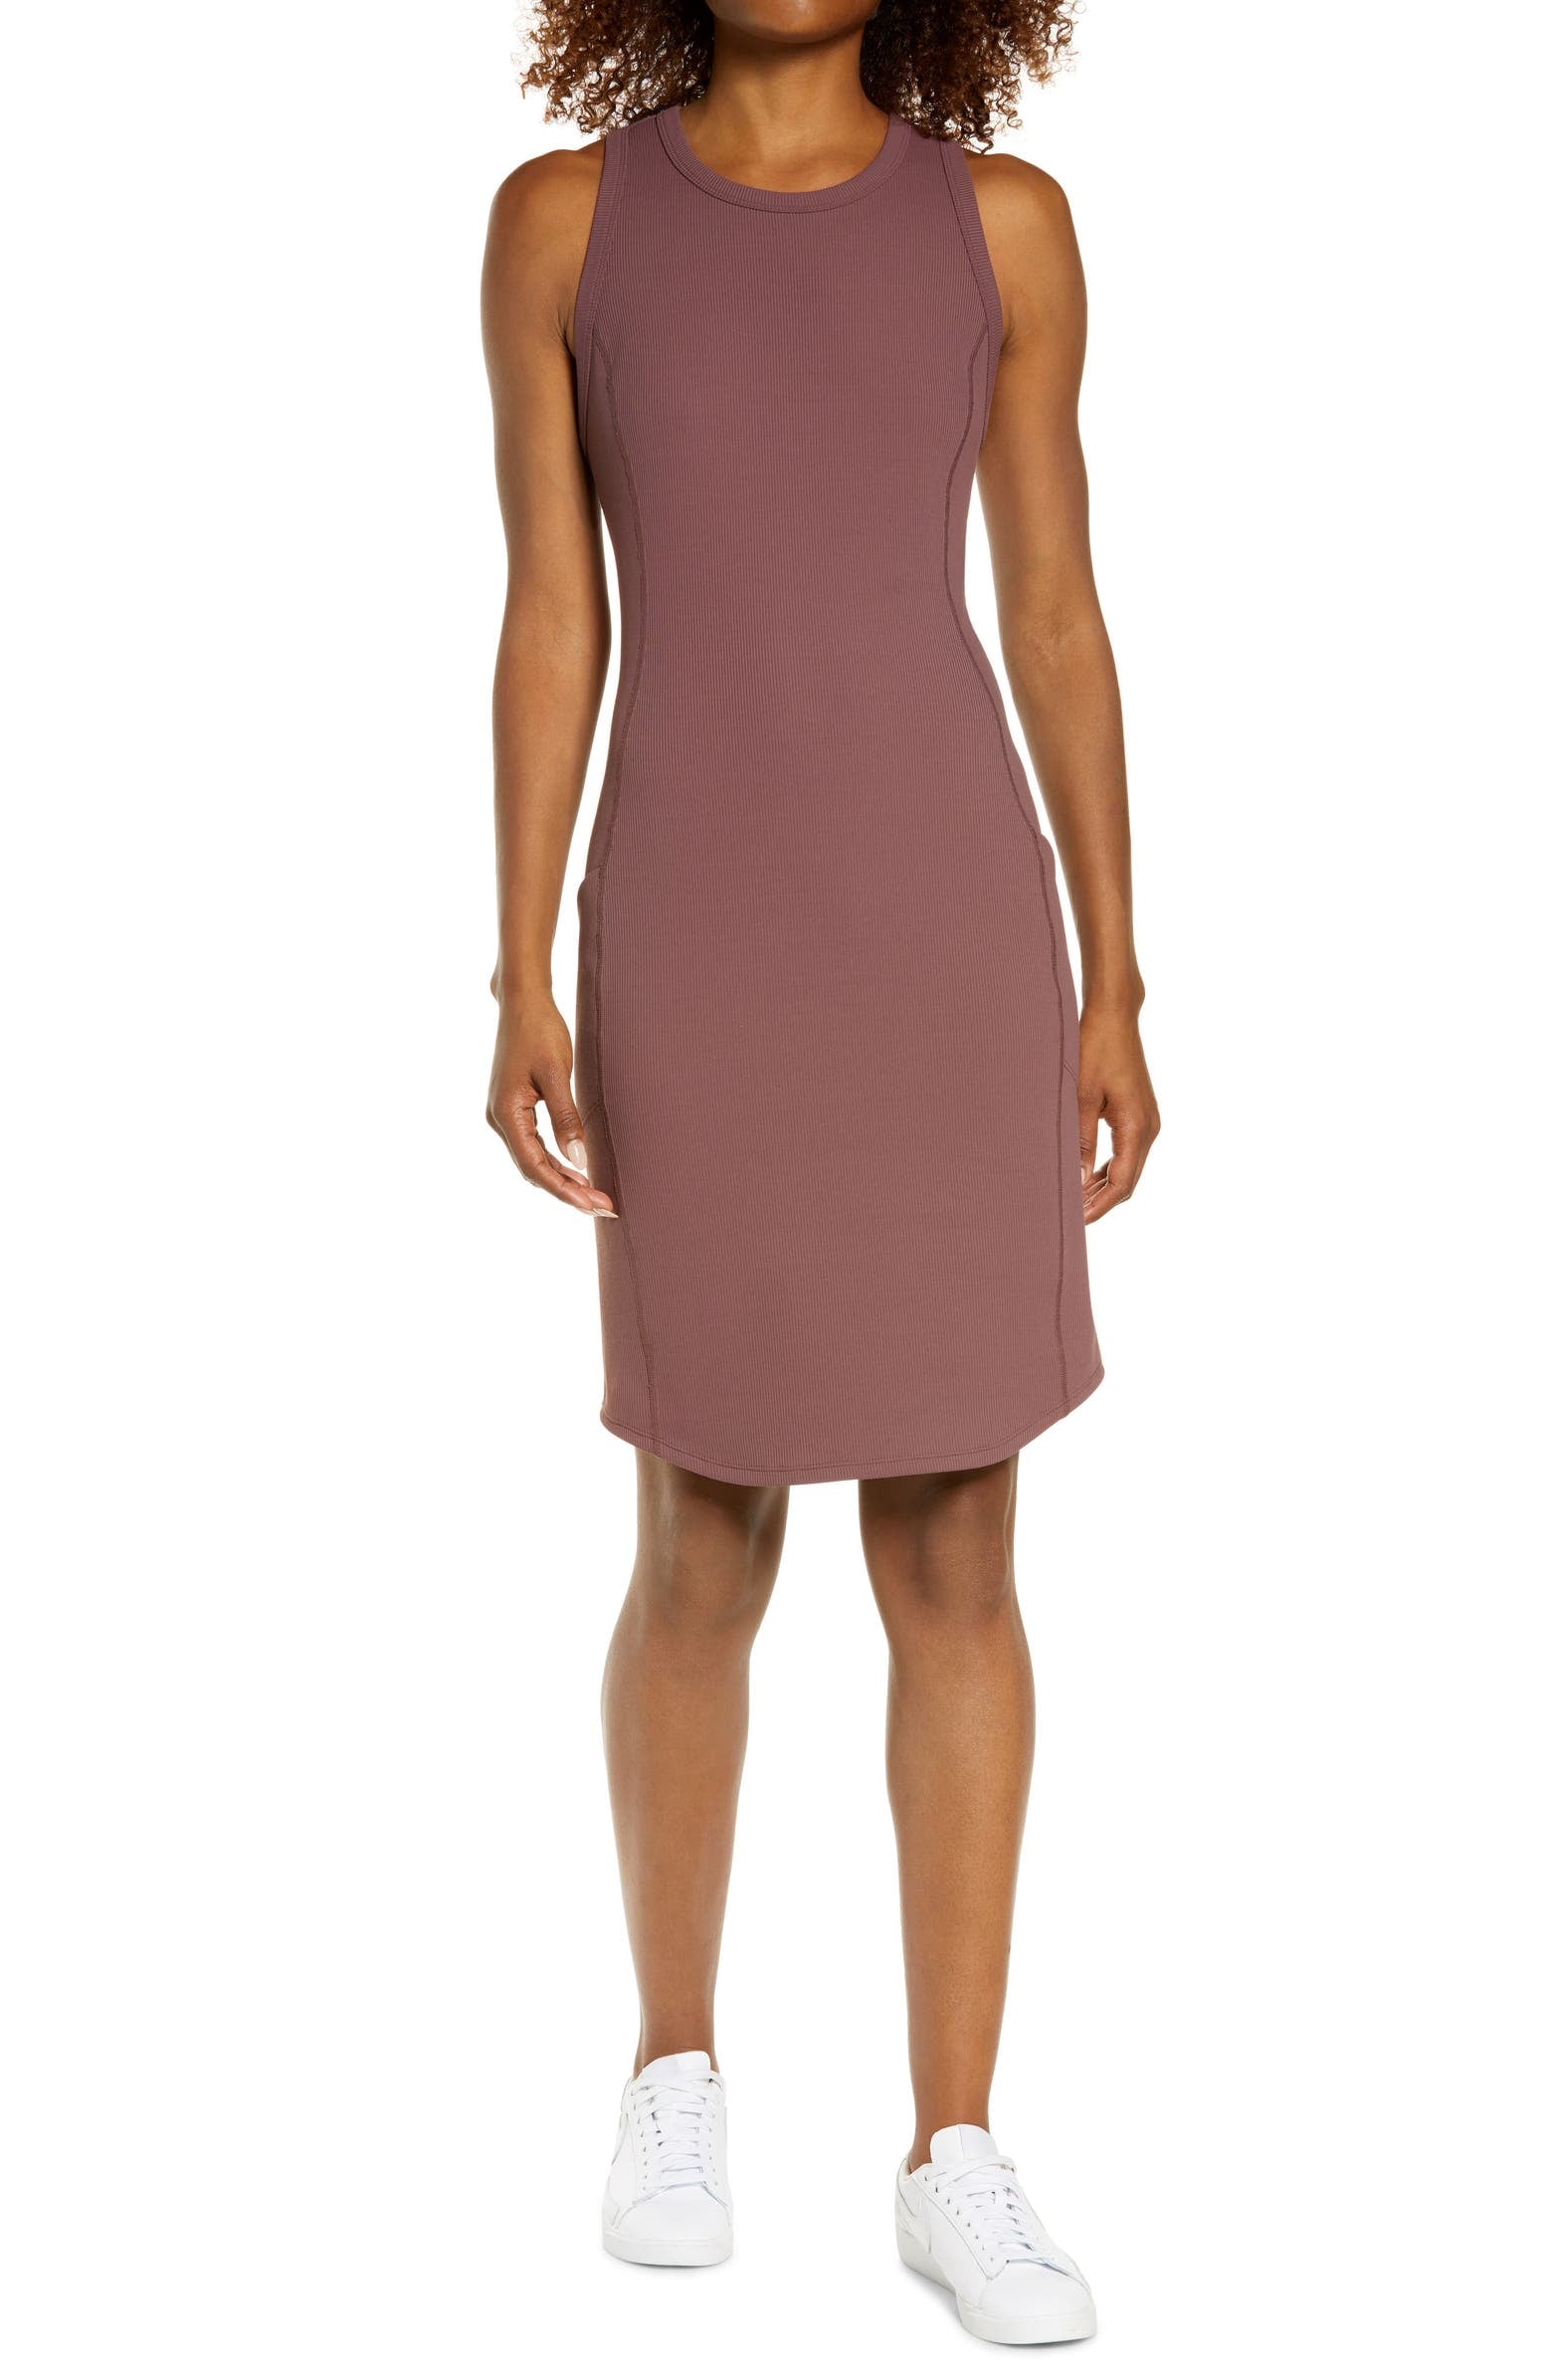 Zella Live In Rib Pocket Dress, If You Have a Large Bust, You're Going to  Want to Live in These 27 Dresses